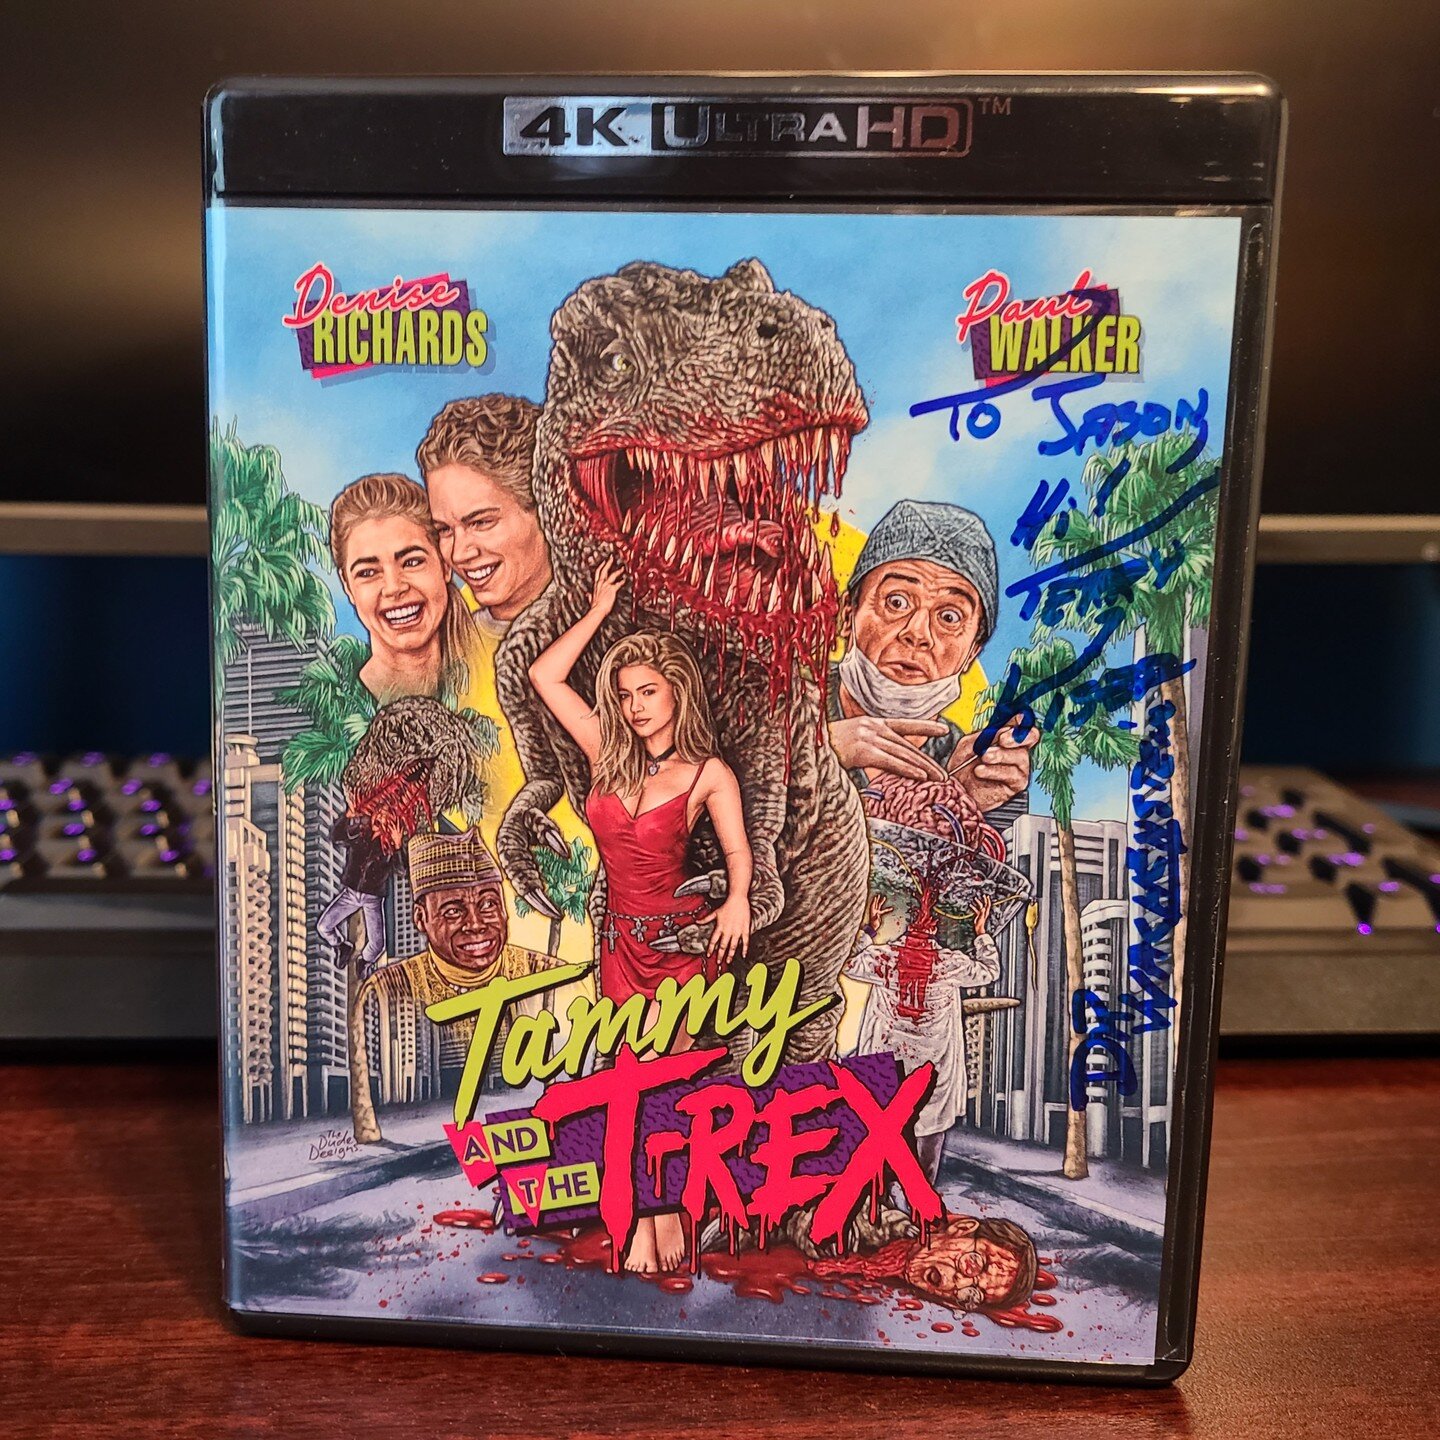 When I met Terry Kiser, Bernie from Weekend at Bernie's, I had to get him to sign my copy of Tammy and T-Rex.